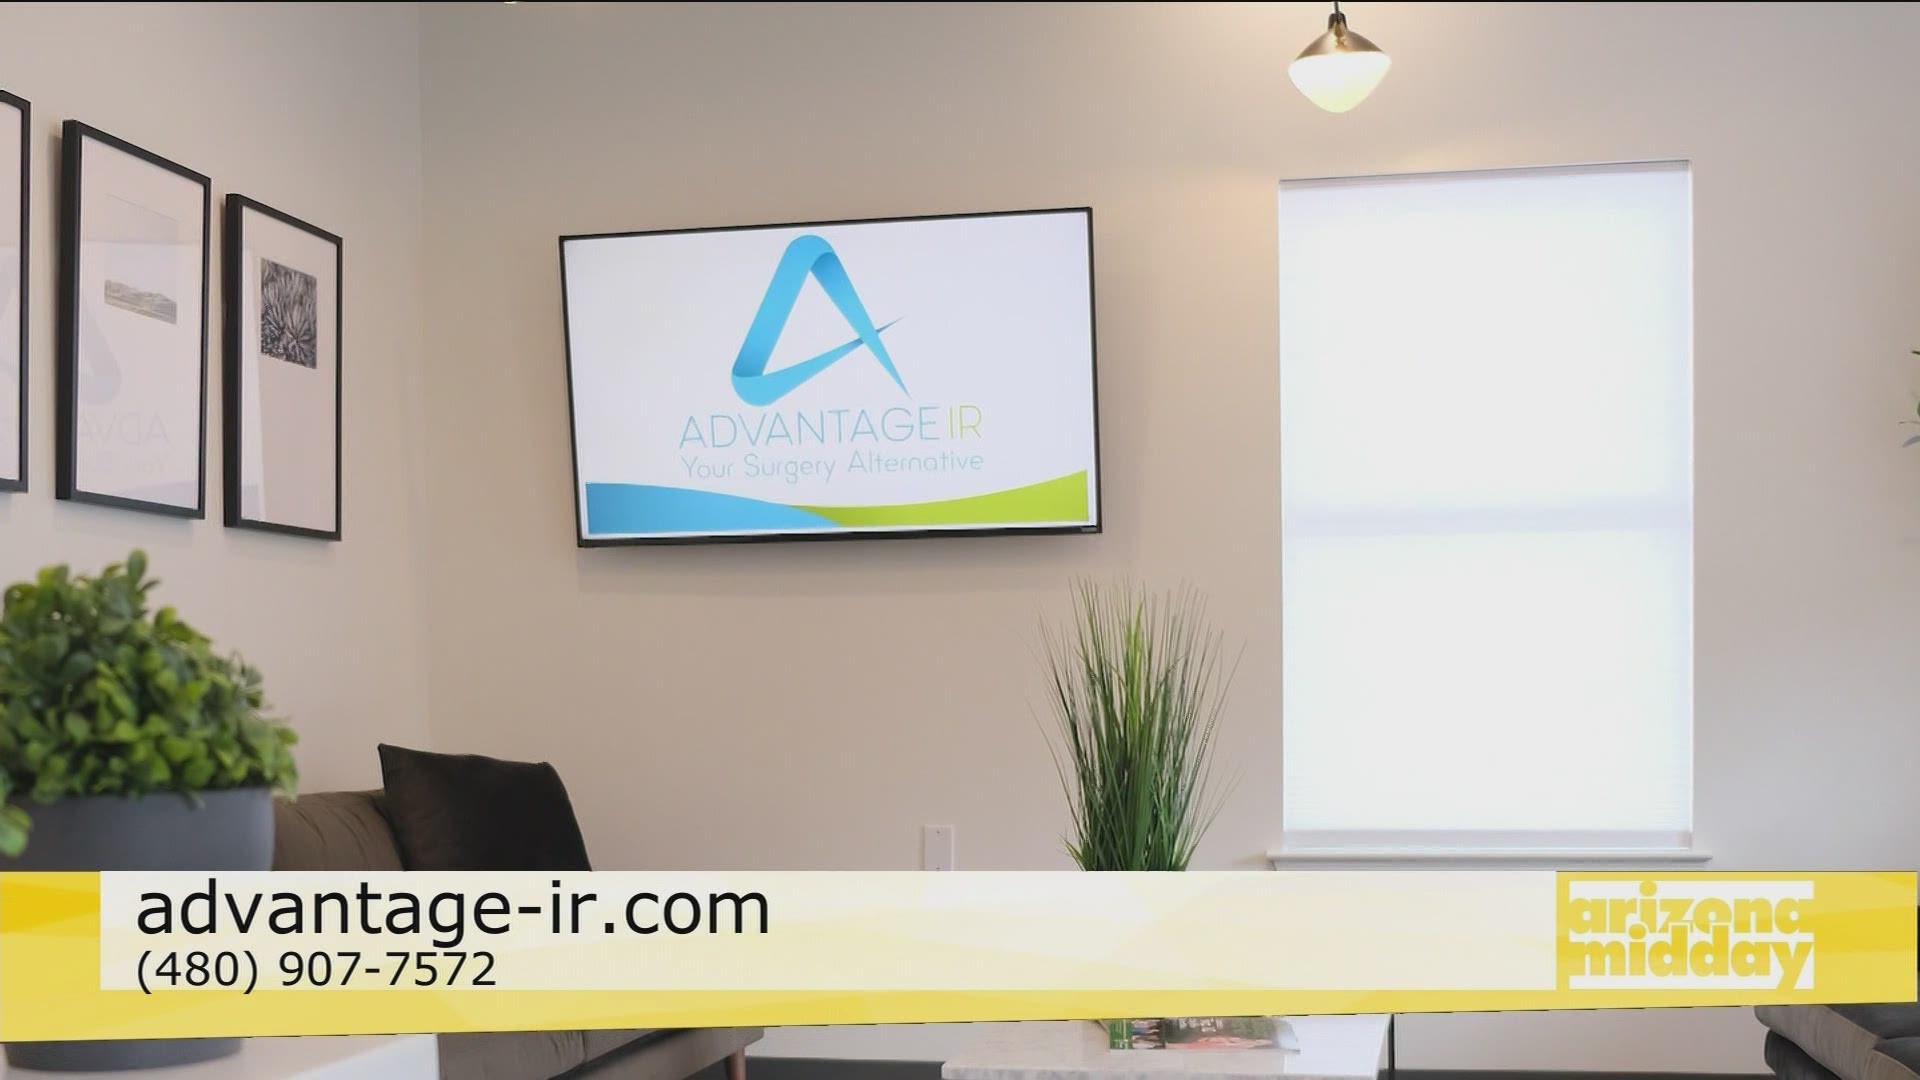 Dr. David Wood with Advantage IR talks about the newest treatment for BPH and how it's helping men